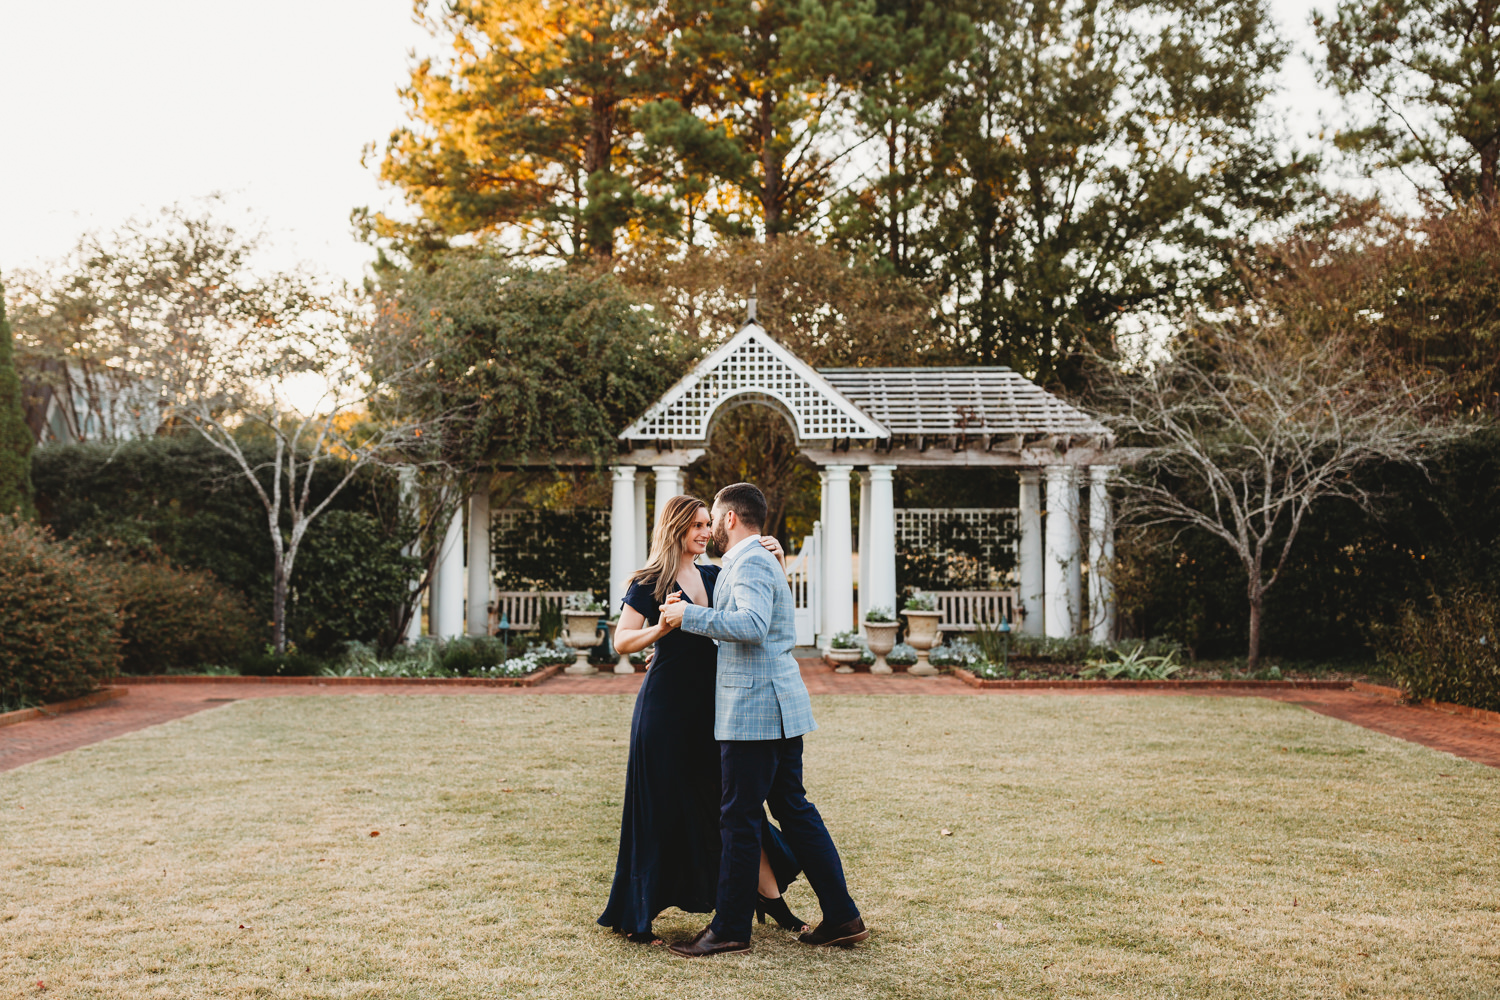 Daniel Stowe Botanical Gardens engagement, Daniel Stowe Botanical Gardens wedding, Daniel Stowe Botanical gardens, North Carolina Engagement Photographer, Charlotte NC Engagement, North Carolina engagement Picture ideas, Charlotte NC wedding Photographer, engagement locations in Charlotte NC, engagement inspiration, Best places for an engagement session in Charlotte NC, North Carolina Engagement Photos, Asheville NC Engagement Photos, fall engagement photos, winter engagement photos